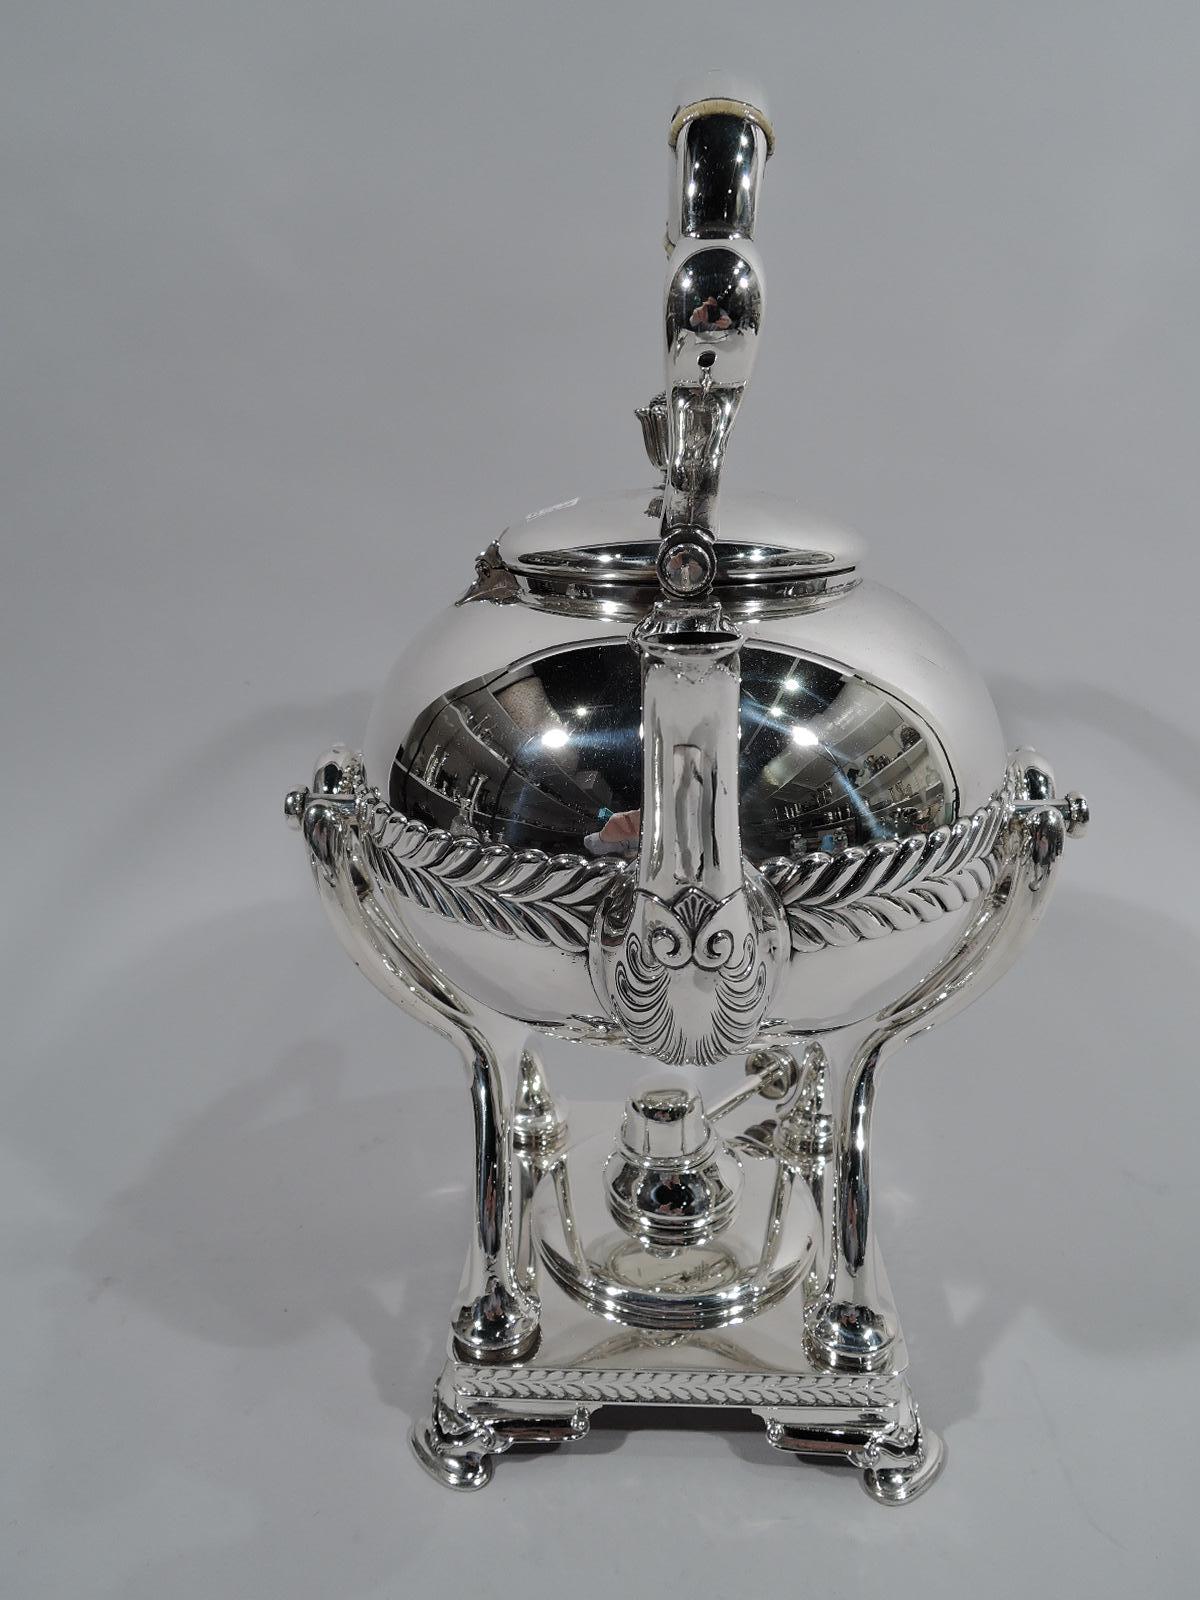 Stylish sterling silver hot water kettle on stand. Made by Tiffany & Co. in New York, circa 1910. Kettle: Globular with upright spout, swing trefoil handle, and side-hinged cover with stylized bud finial. Stand: Square with open heraldic shield